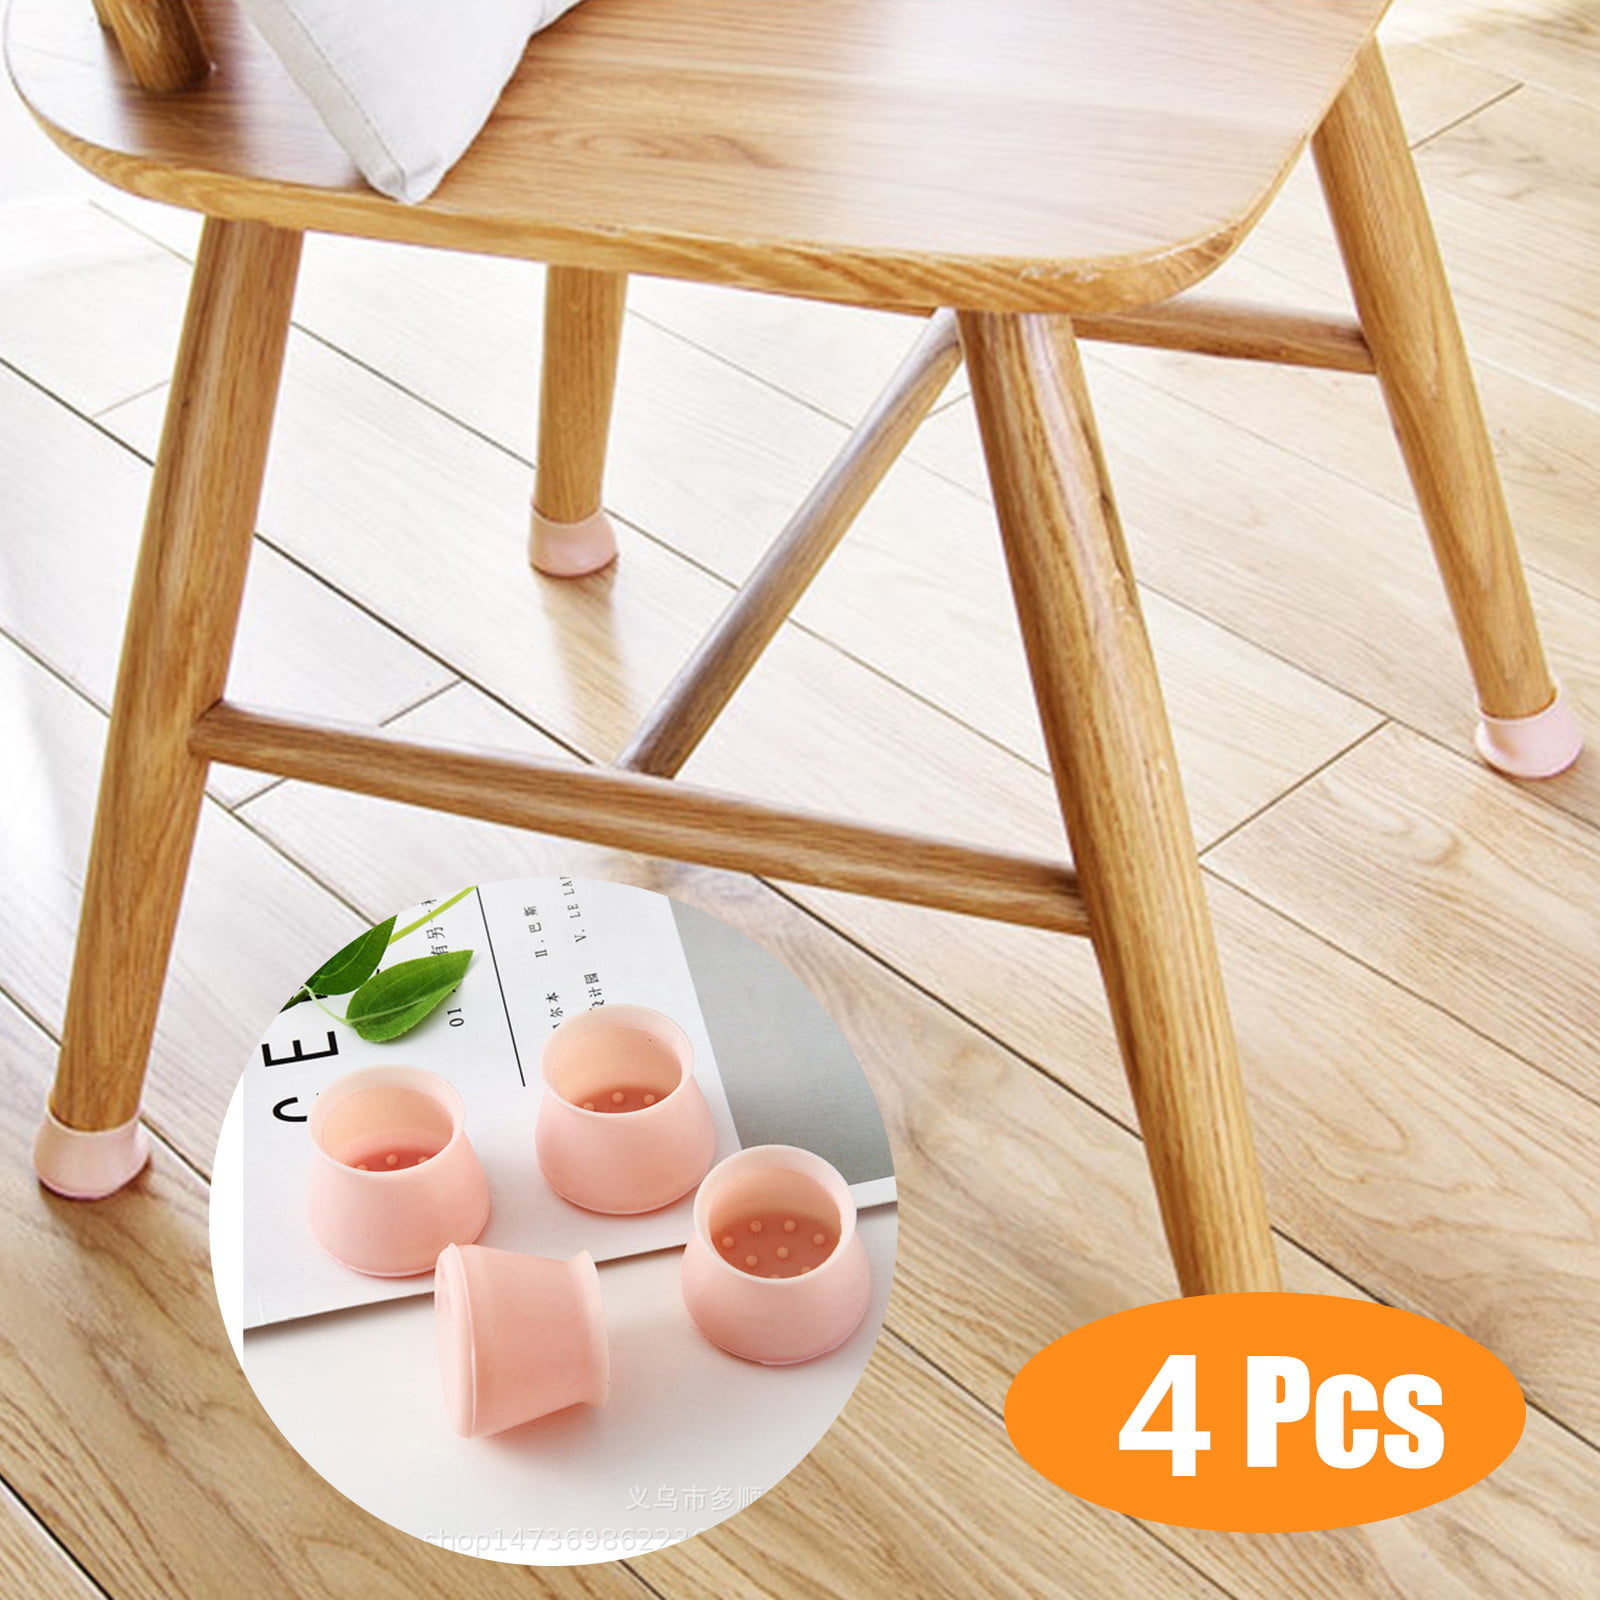 4 pcs Silicon Furniture Leg Protection Cover Table Feet Pad Floor Protector 